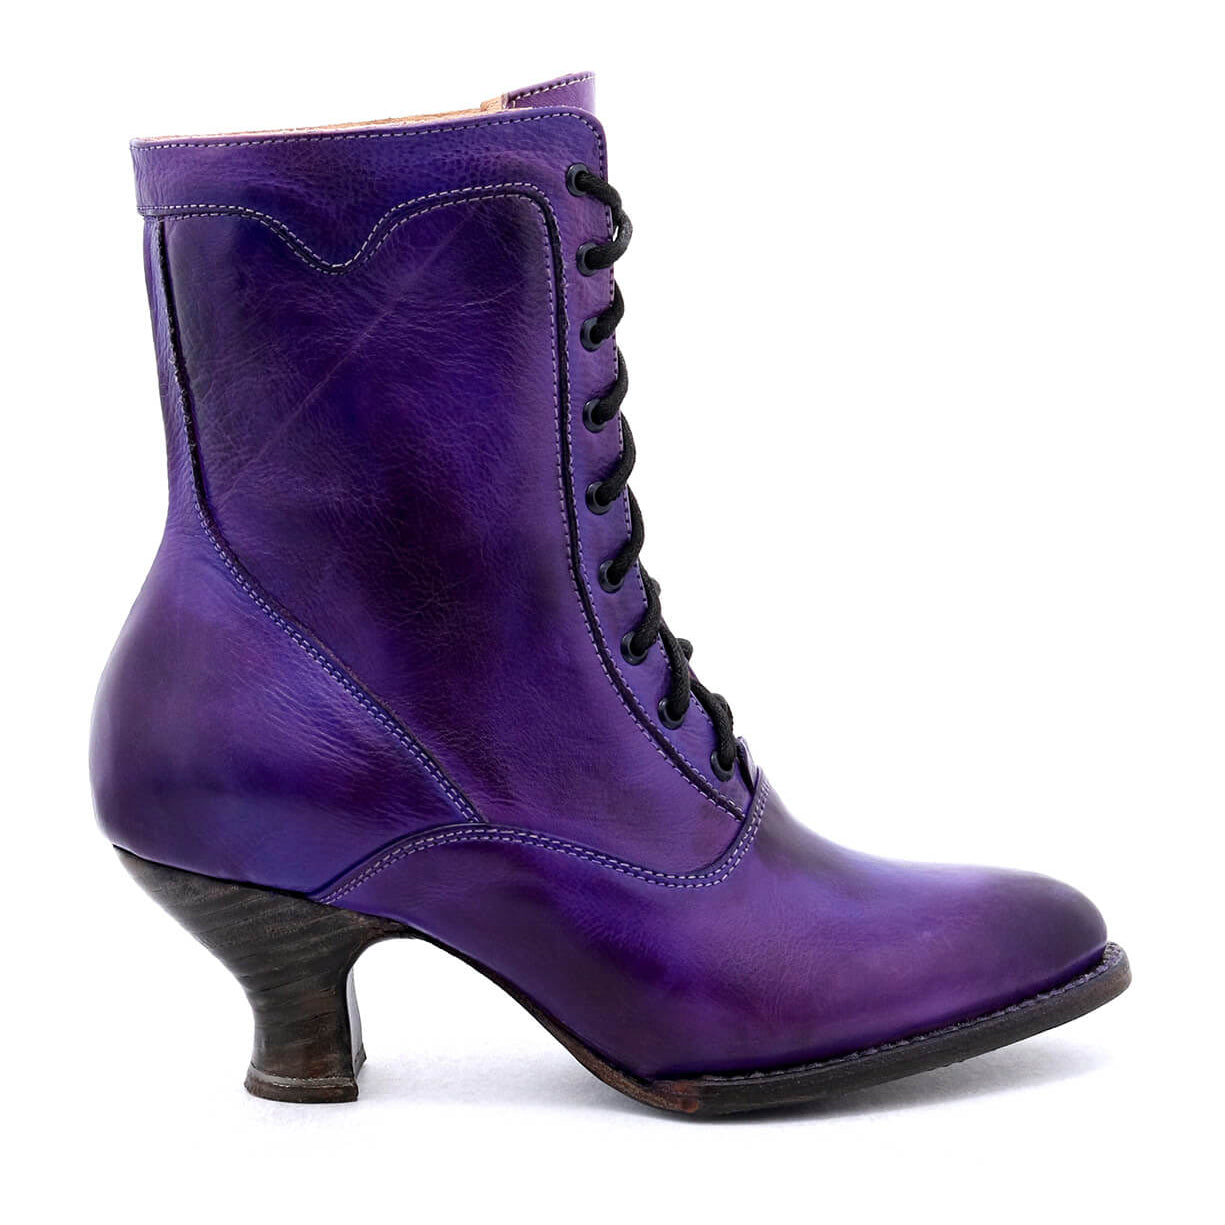 A Victorian style women's purple leather ankle boot, crafted with uncompromising quality and hand-dyed, called the Eleanor by Oak Tree Farms.